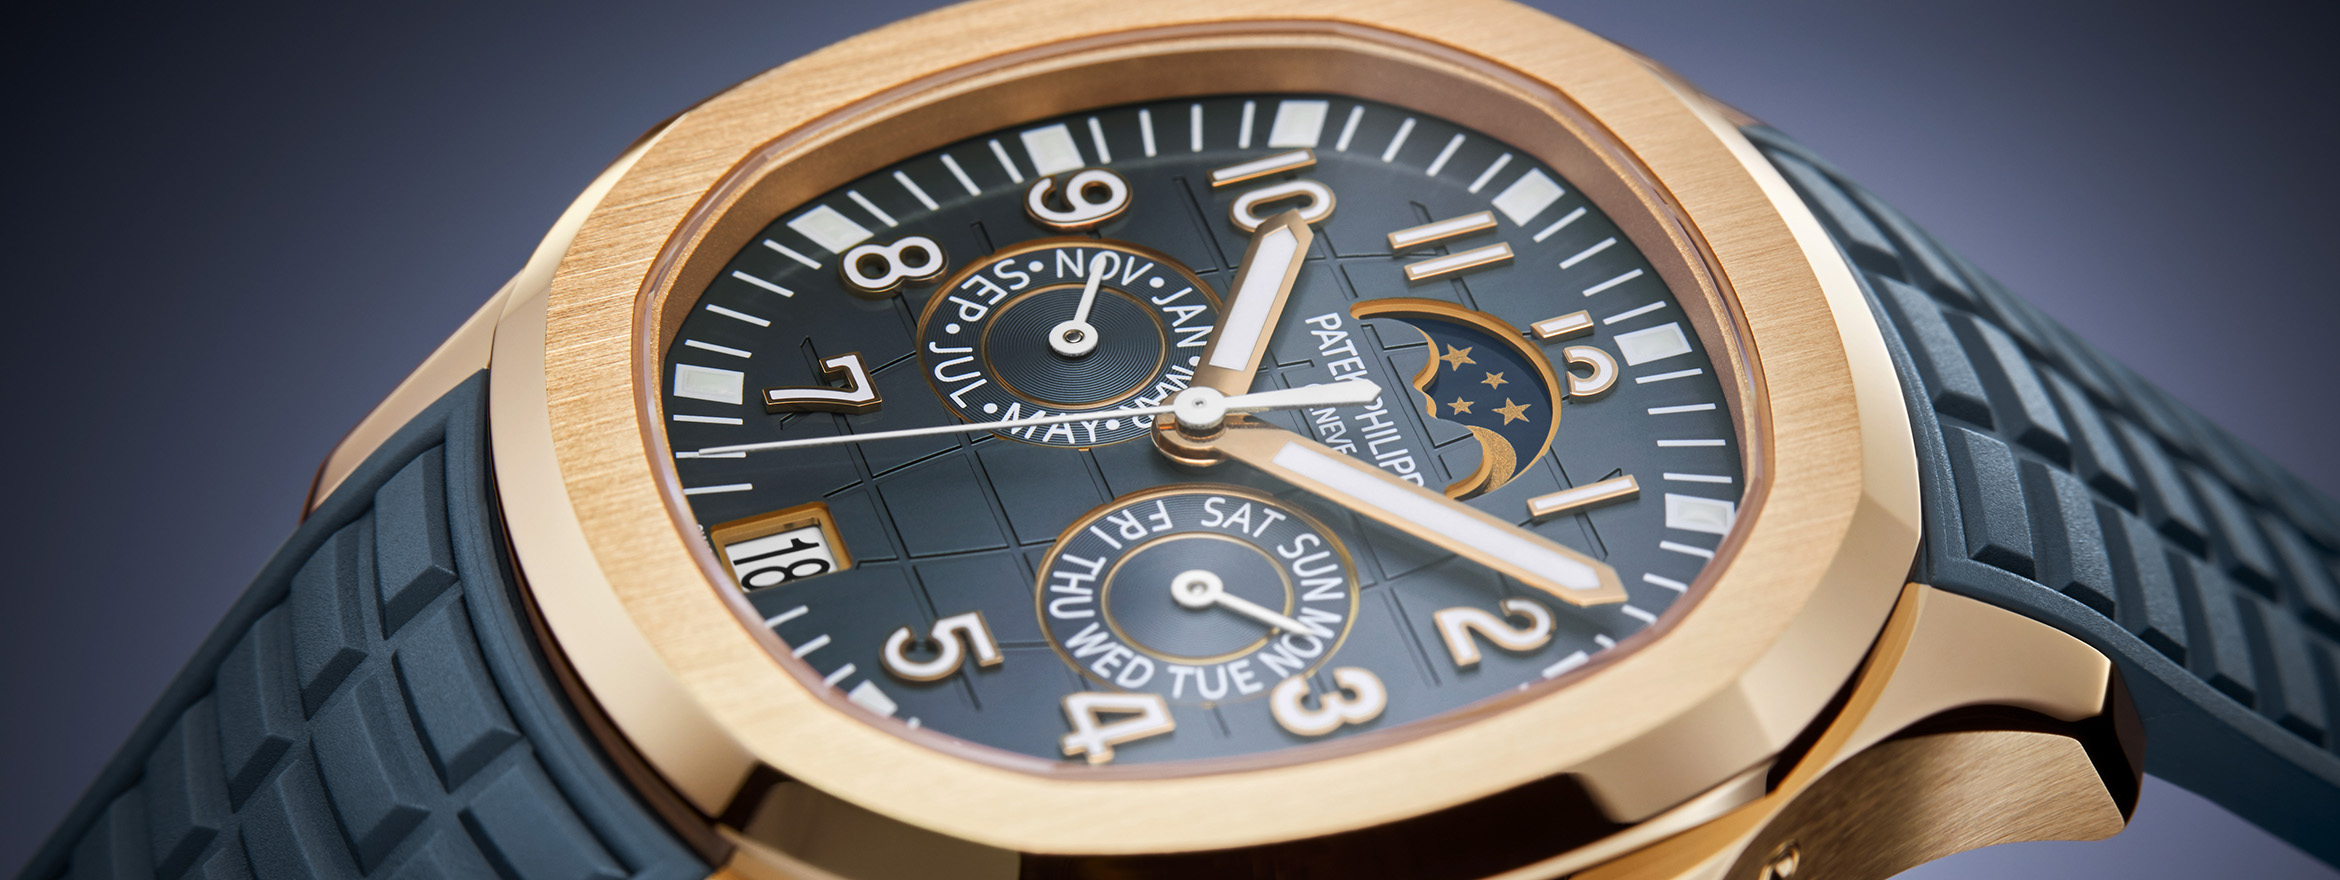 Patek Philippe Introduces Three New Additions to the Aquanaut Collection